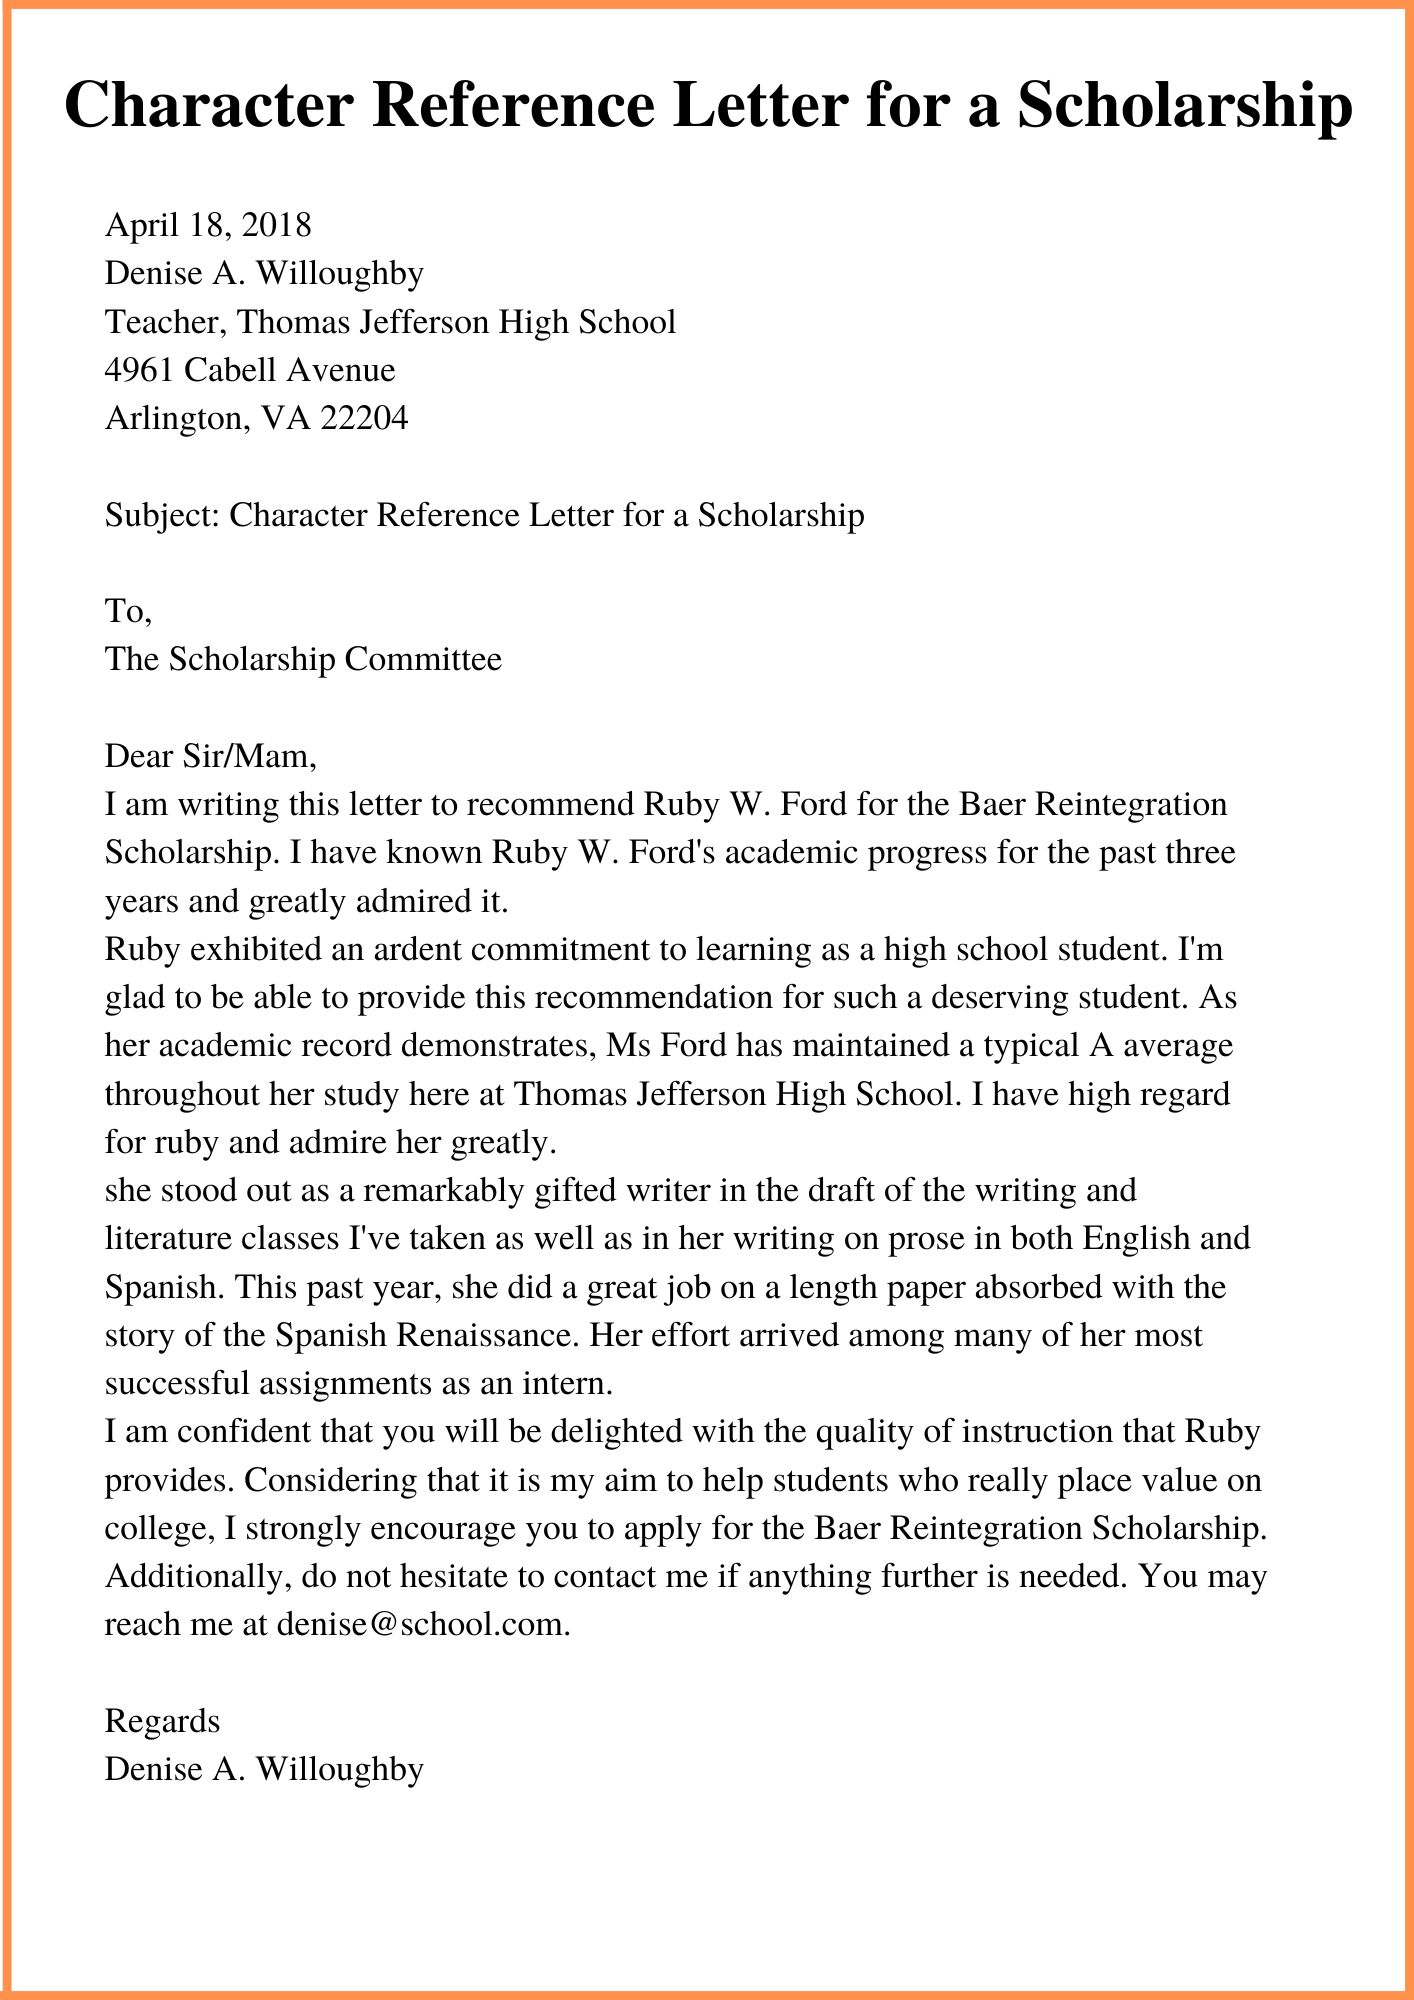 Sample Character Reference Letter for Student Scholarship